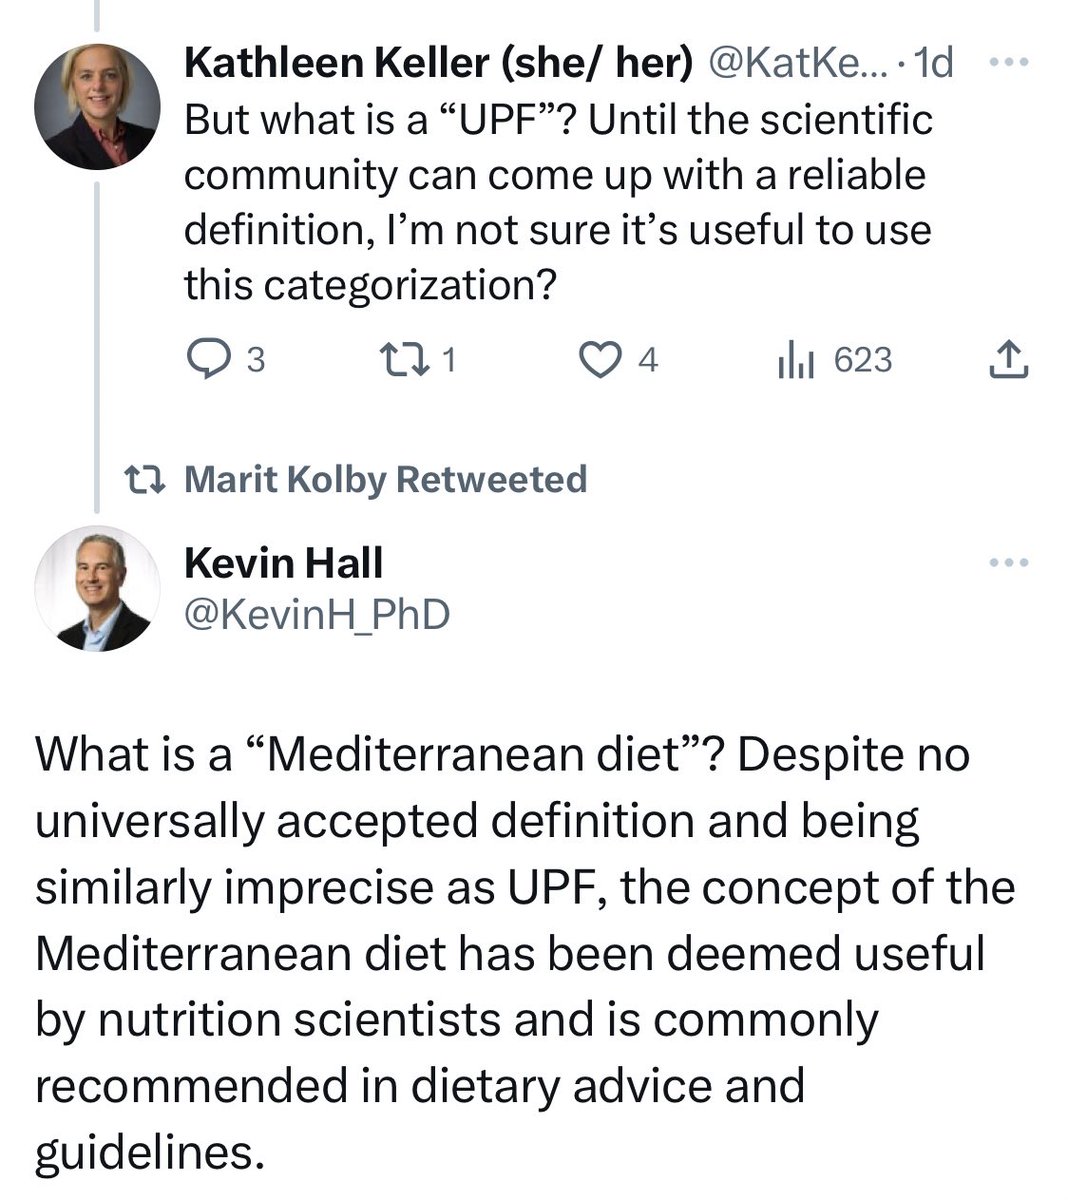 We haven’t defined ultra-processed foods or the Mediterranean diet anywhere near well enough for them to be usefully comparable

However, ketogenic or a carnivore diets are orders of magnitude easier to define https://t.co/27tbigx9eA